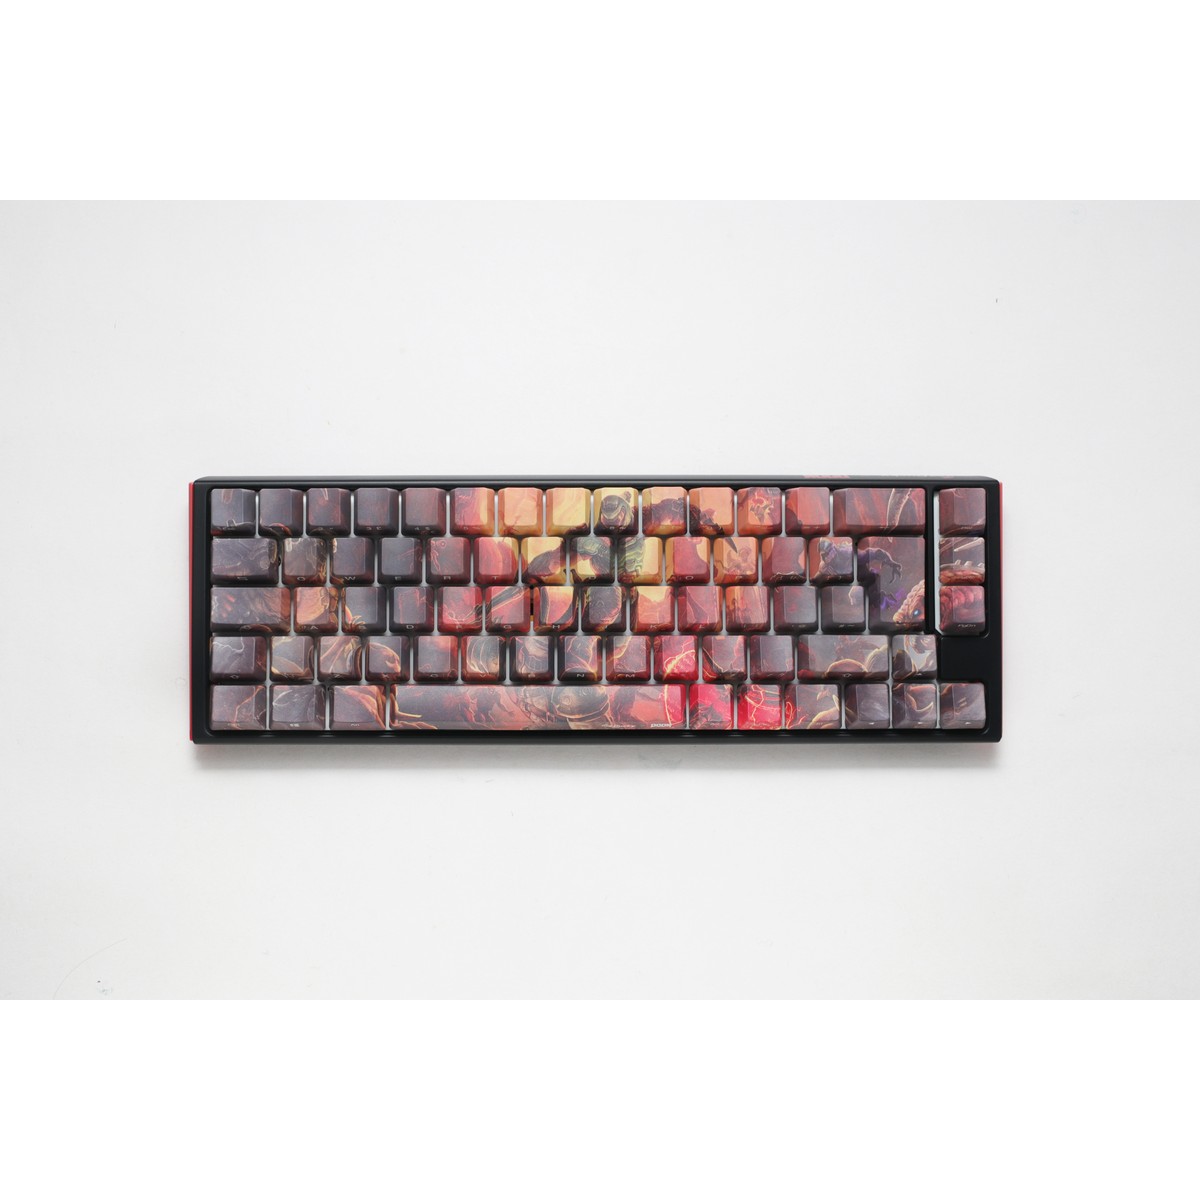 Ducky x DOOM SF 65% Gaming Keyboard Limited Edition Cherry MX Red Switches UK La